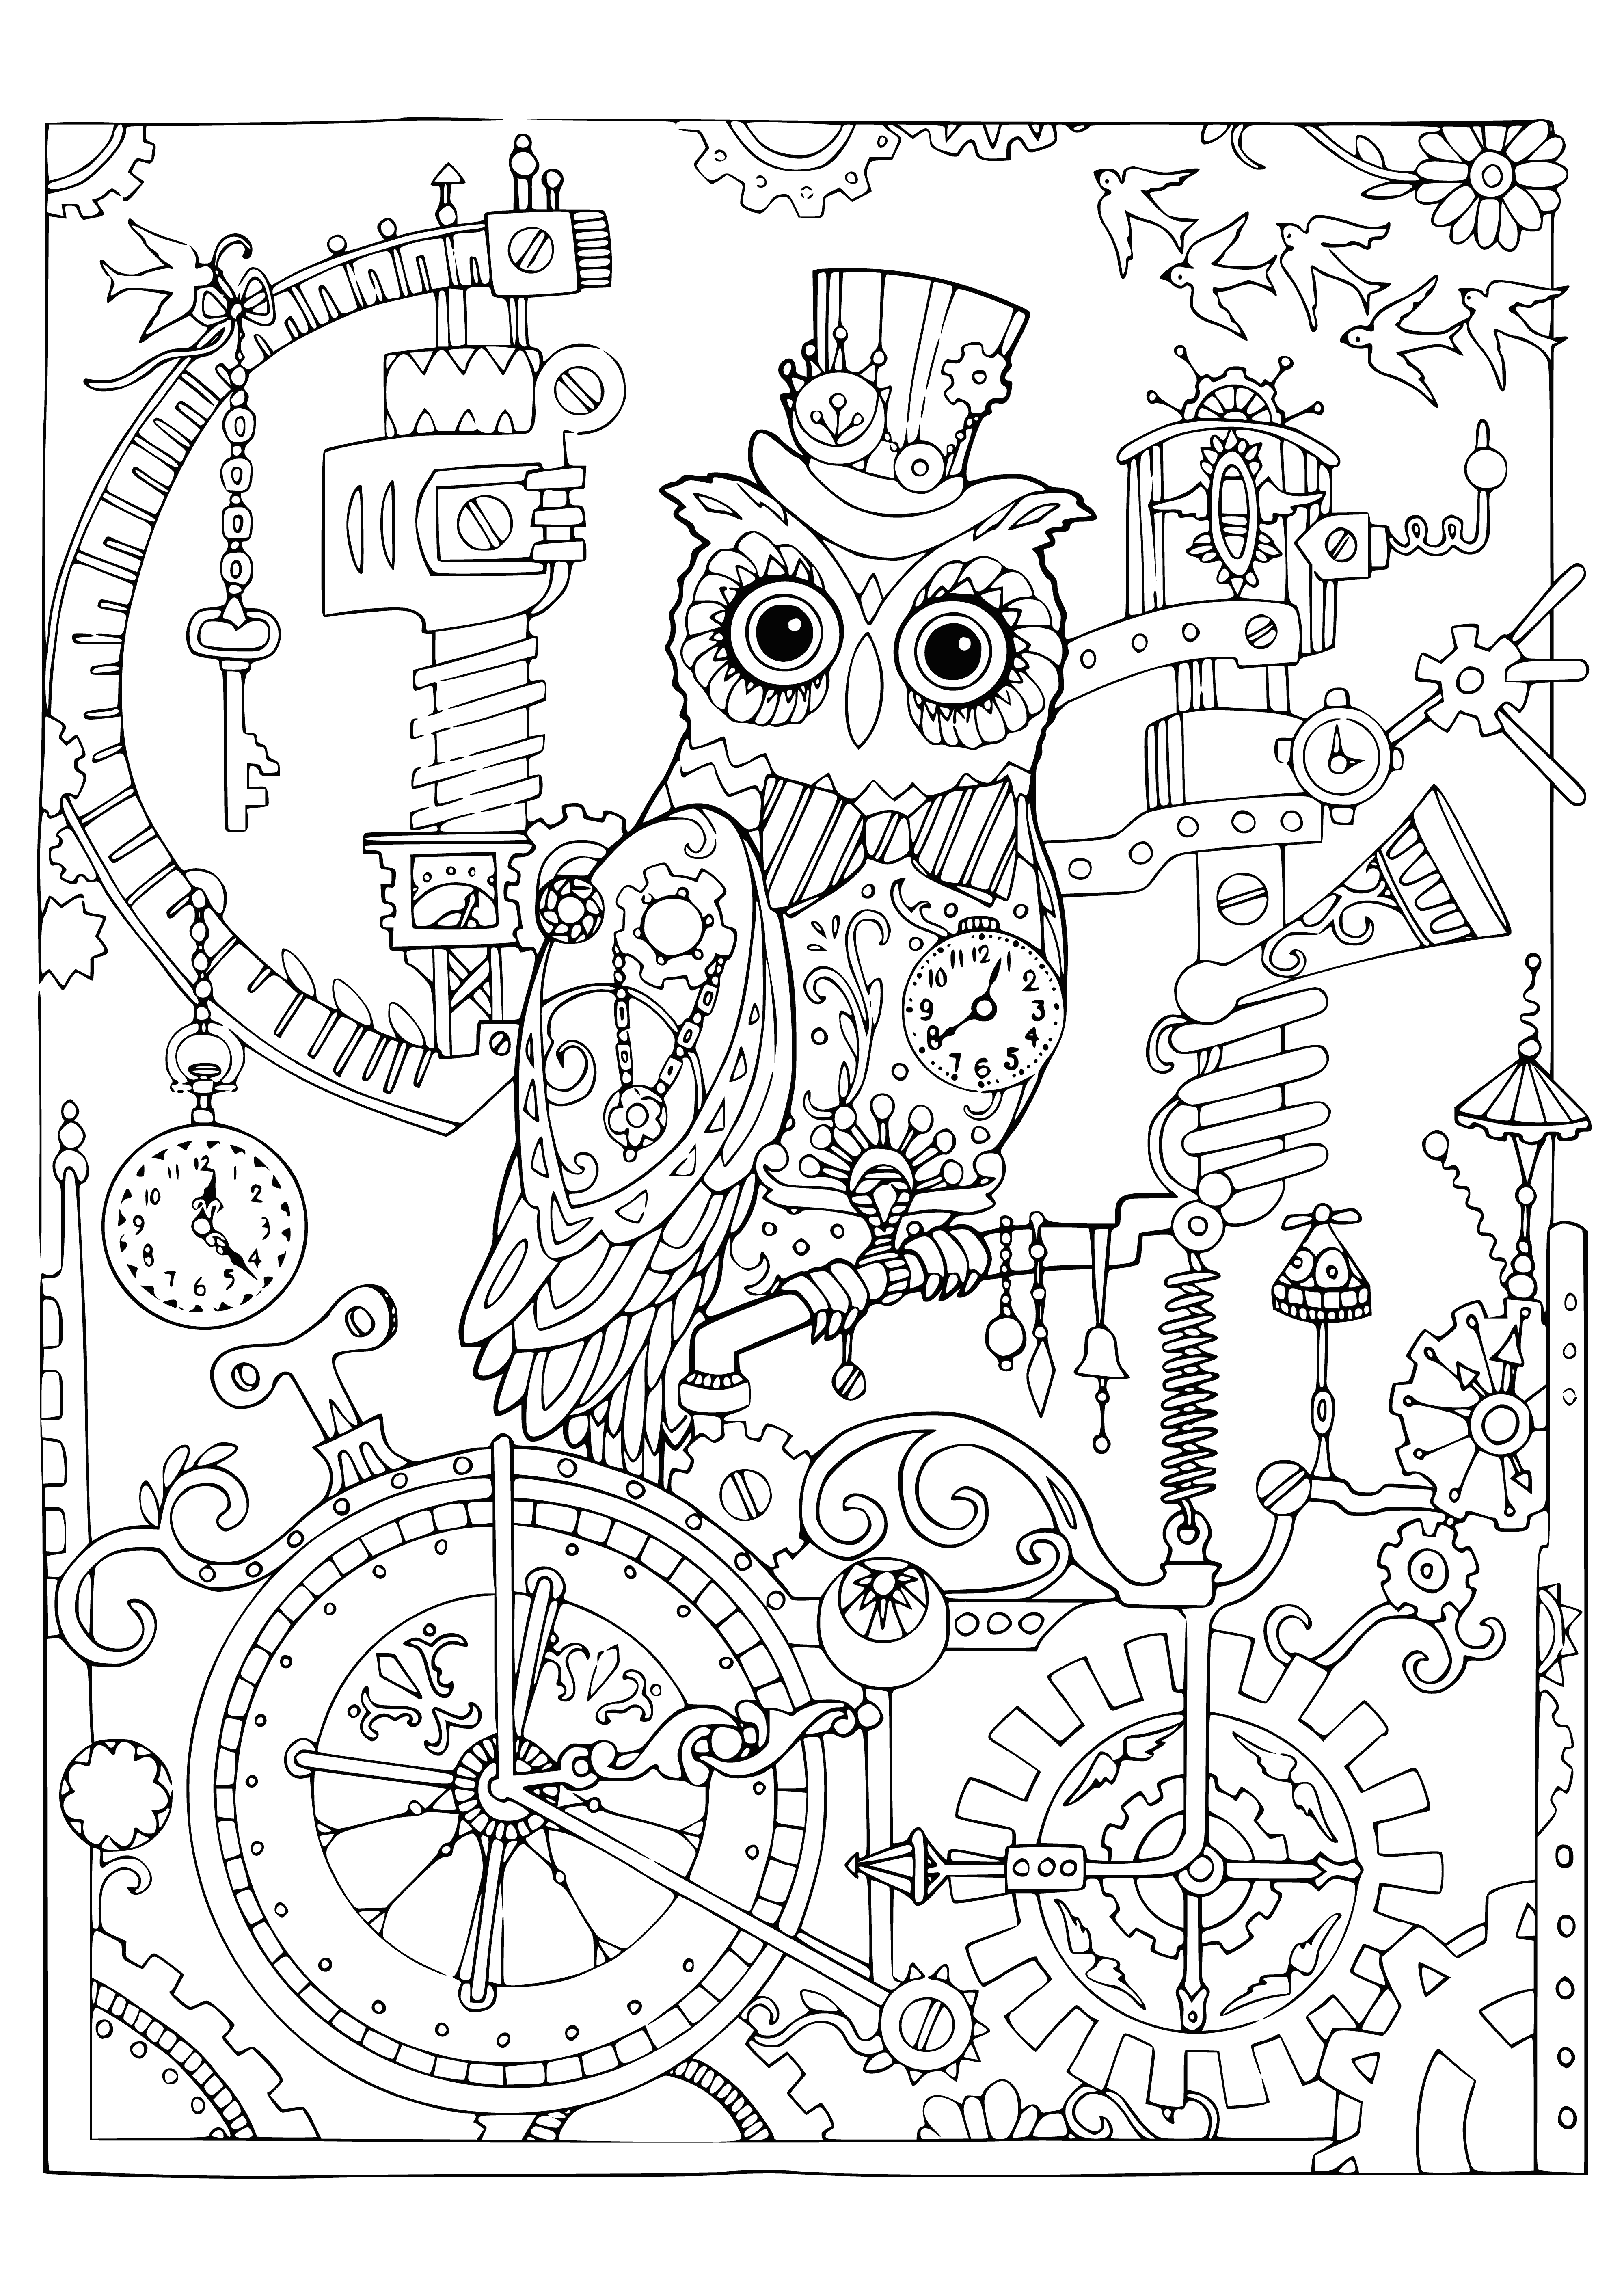 coloring page: Two owls w/eyes closed & gears on wings, one has watch on its foot, sitting on a branch. #coloringpage #owlsarecute